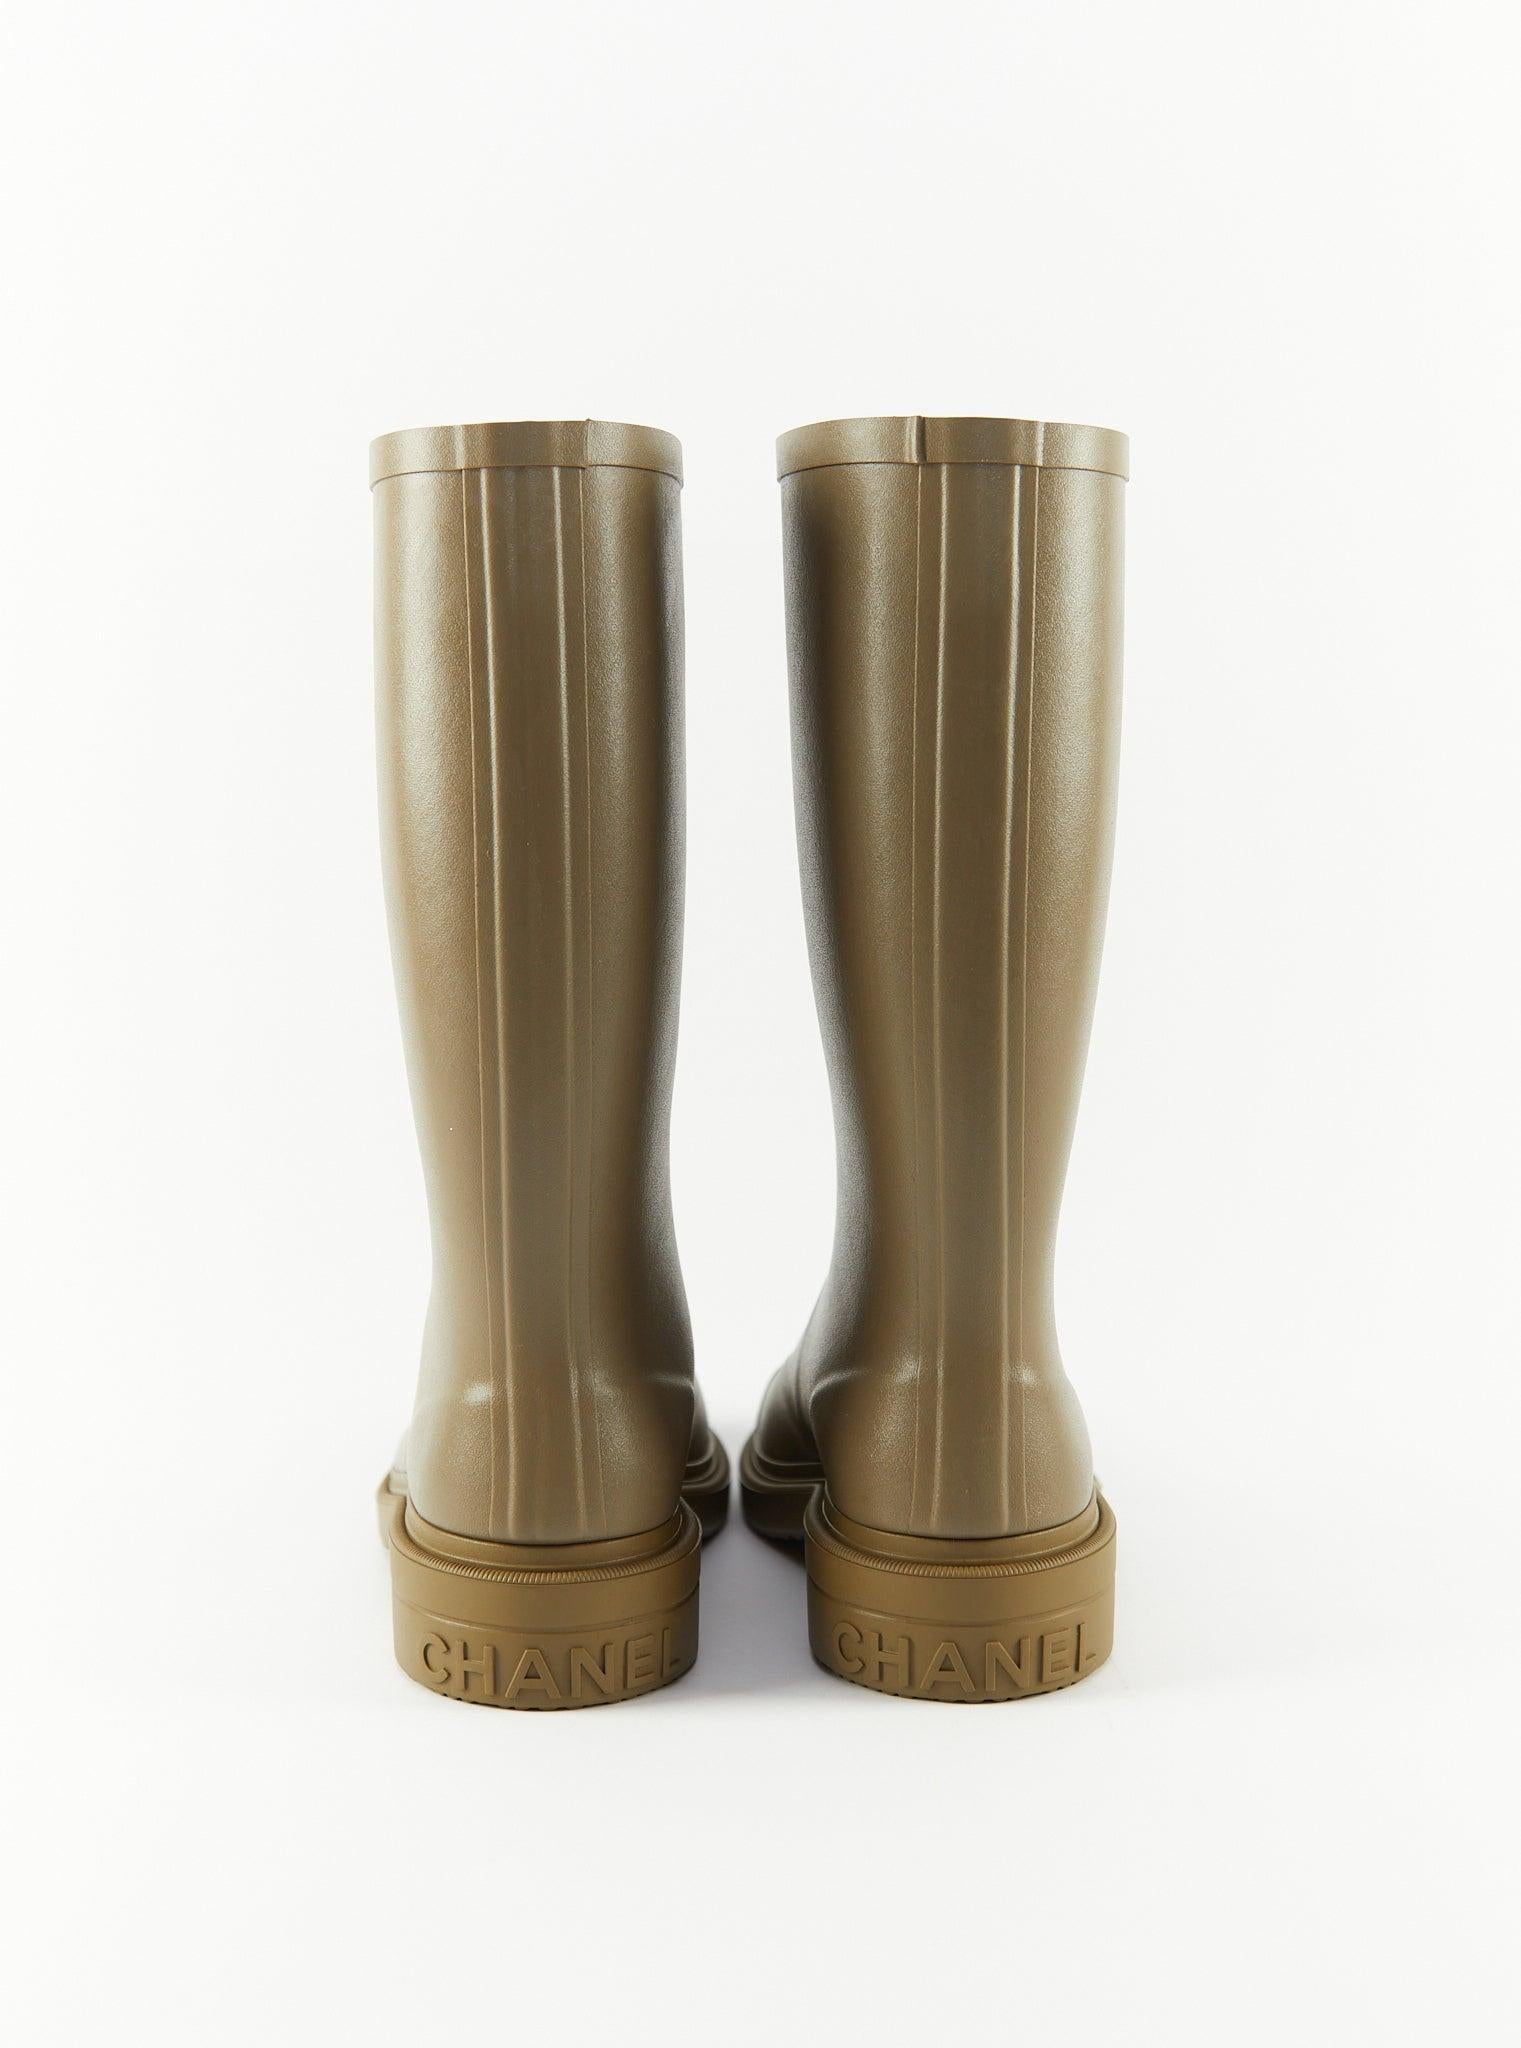 CHANEL WELLIES Khaki - Size 38 For Sale 1